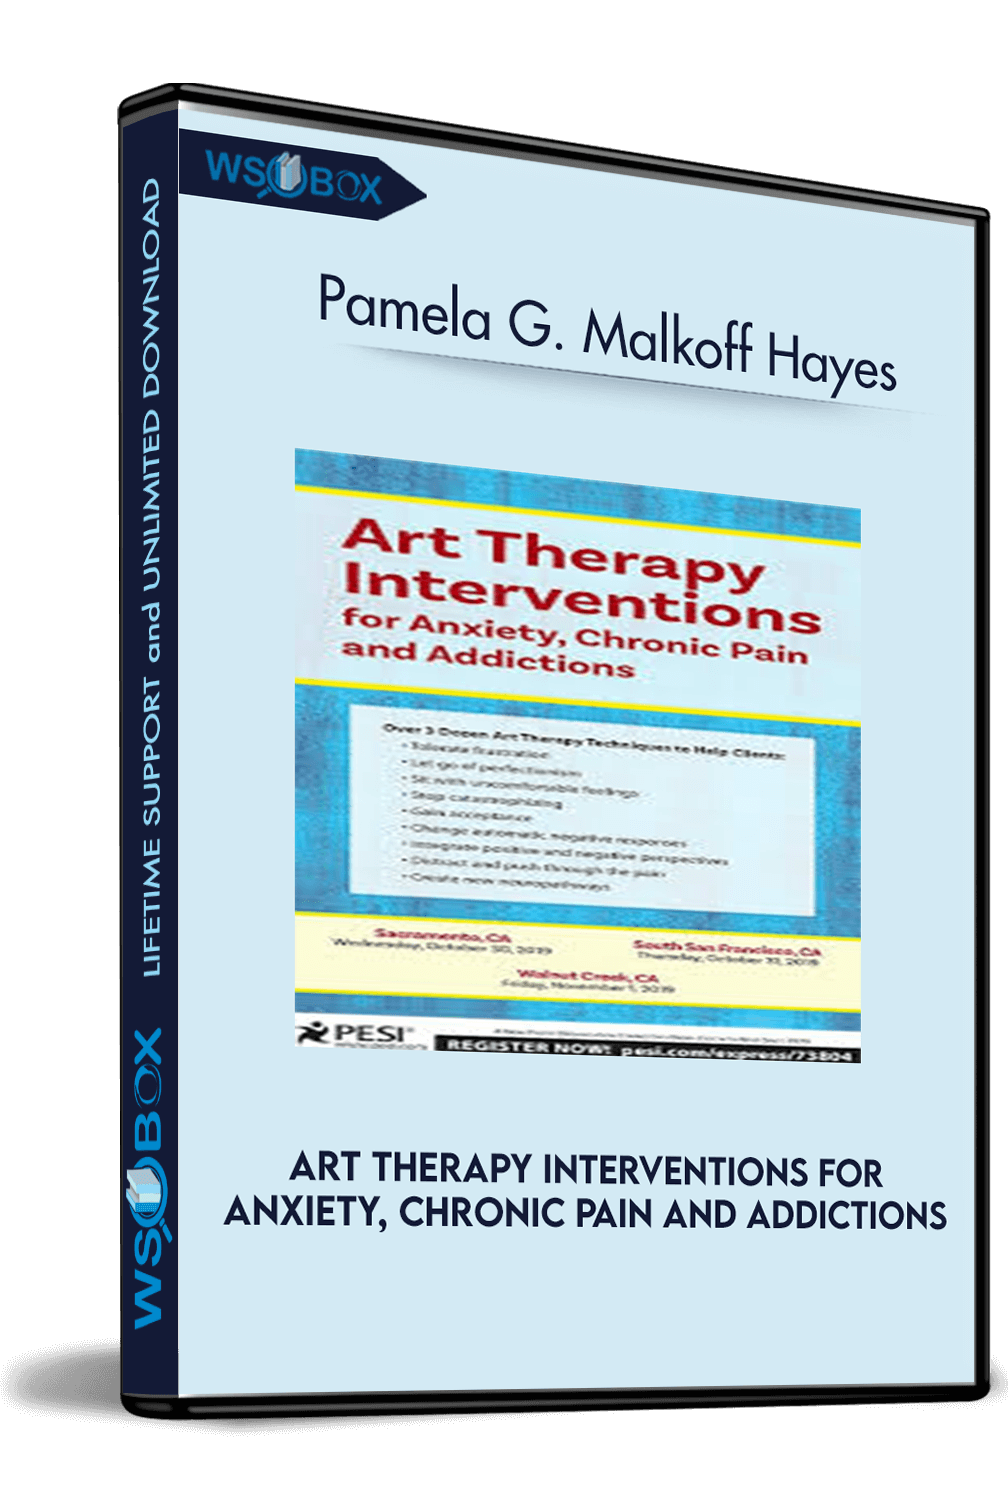 art-therapy-interventions-for-anxiety-chronic-pain-and-addictions-pamela-g-malkoff-hayes